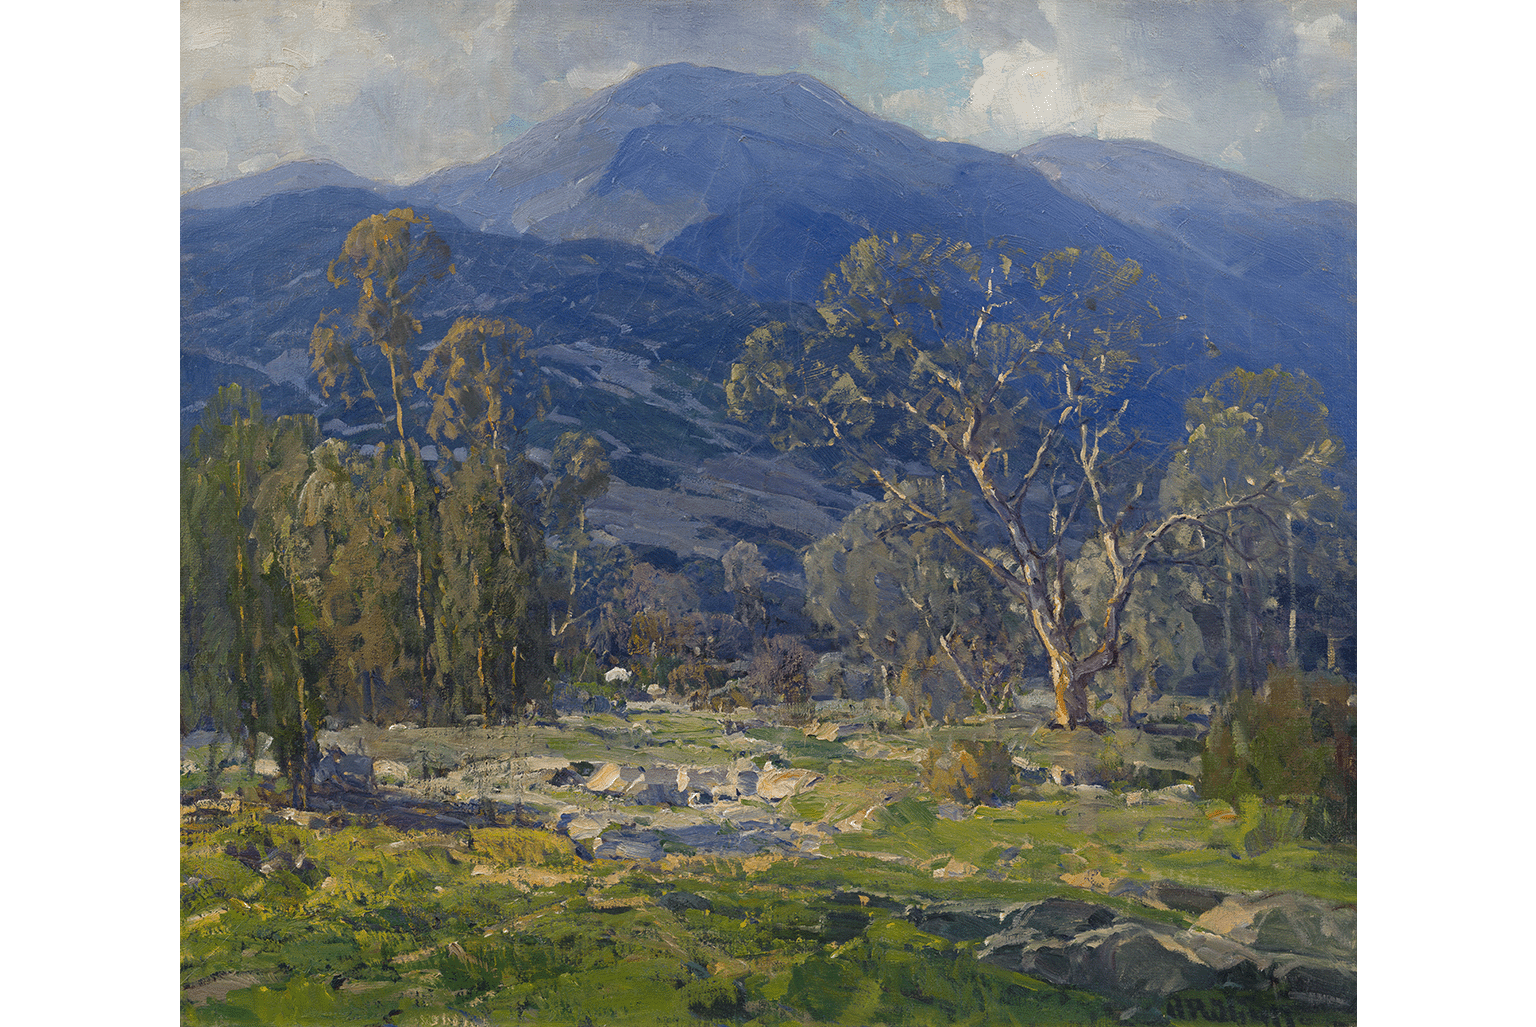 Hanson Duvall Puthuff, Transient Shadows, circa 1926, Oil on canvas, 26 x 30 in. The Buck Collection at UCI Jack and Shanaz Langson Institute and Museum of California Art